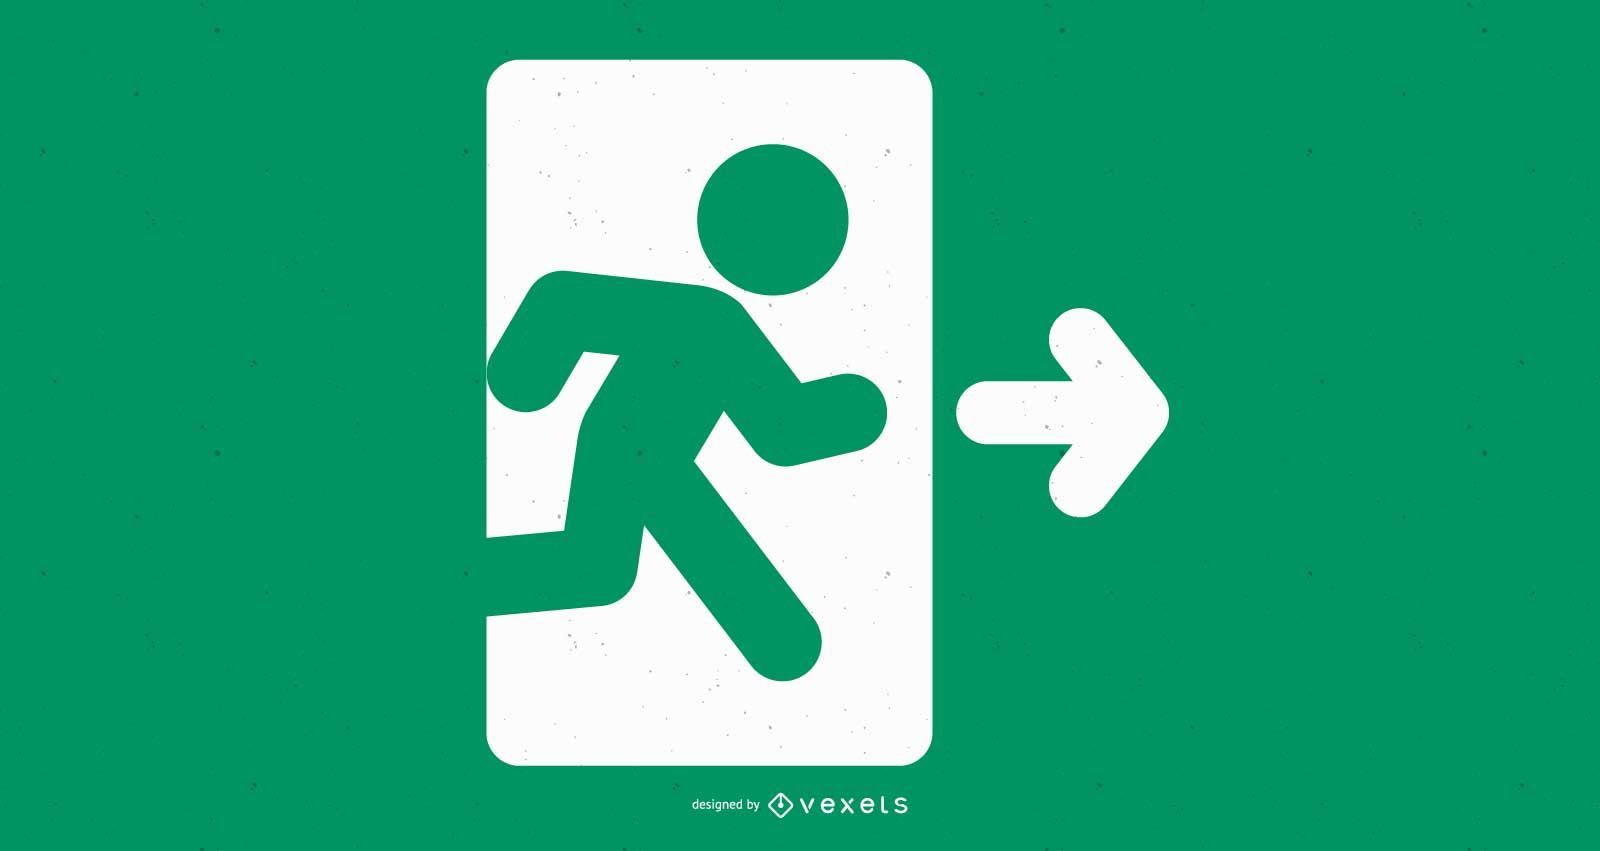 Fire Exit Signage